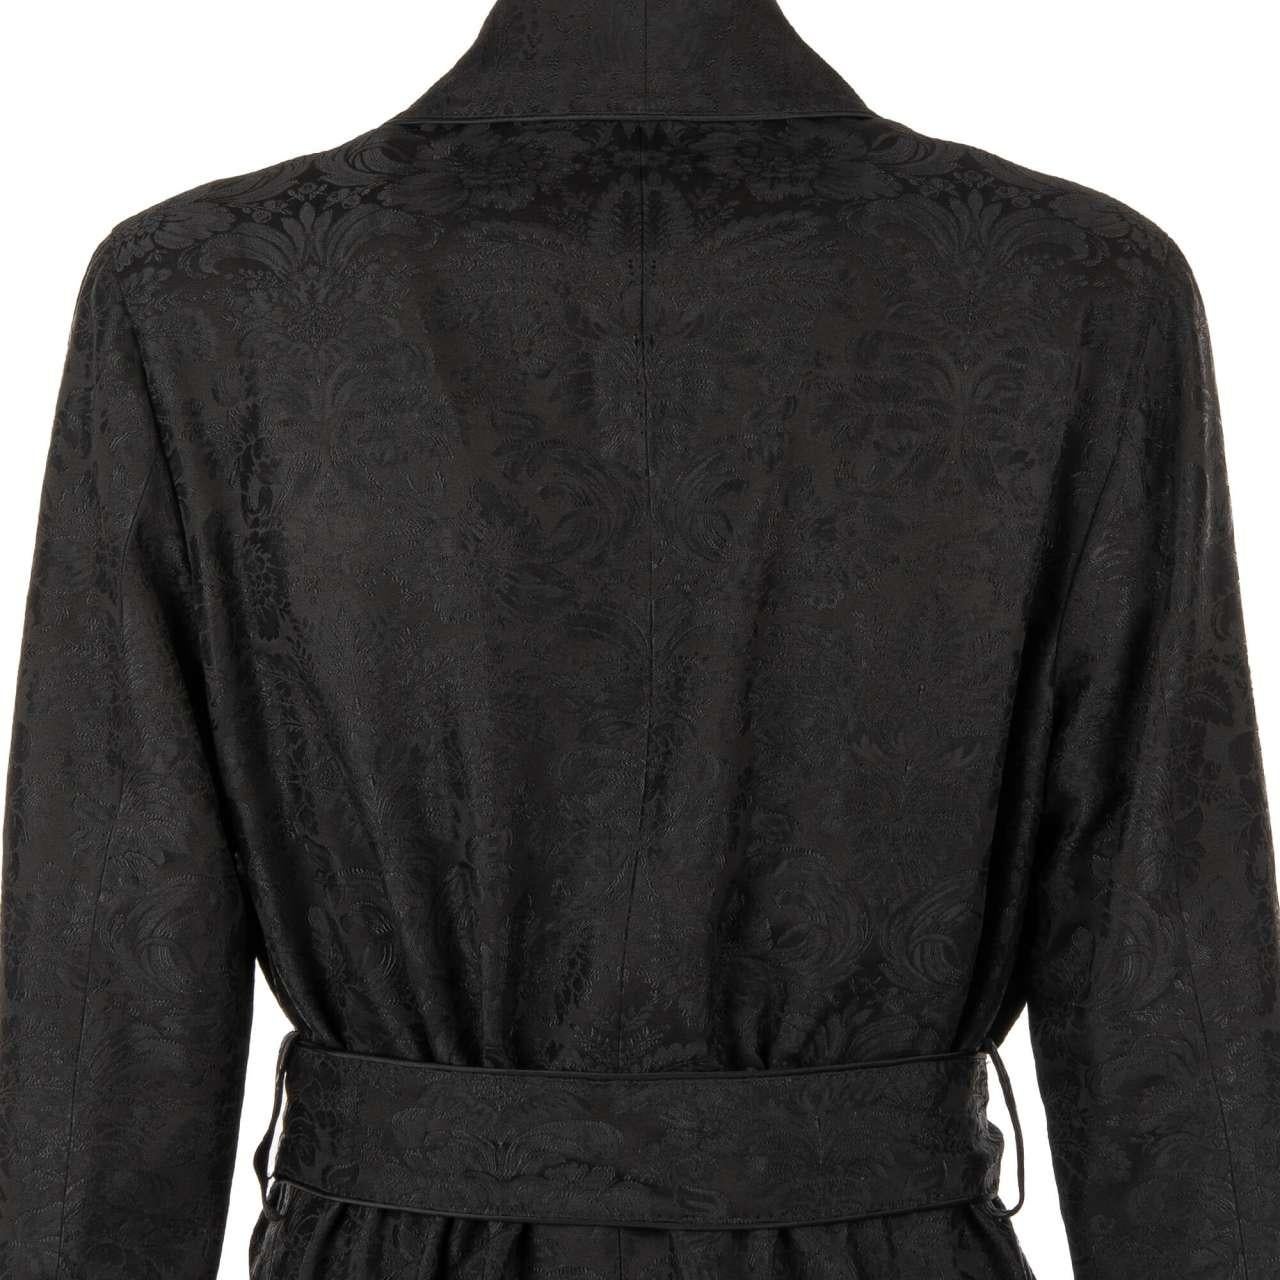 D&G Floral Jacquard Robe Blazer with DG Heart Crown Embroidery Black 46 In Excellent Condition For Sale In Erkrath, DE